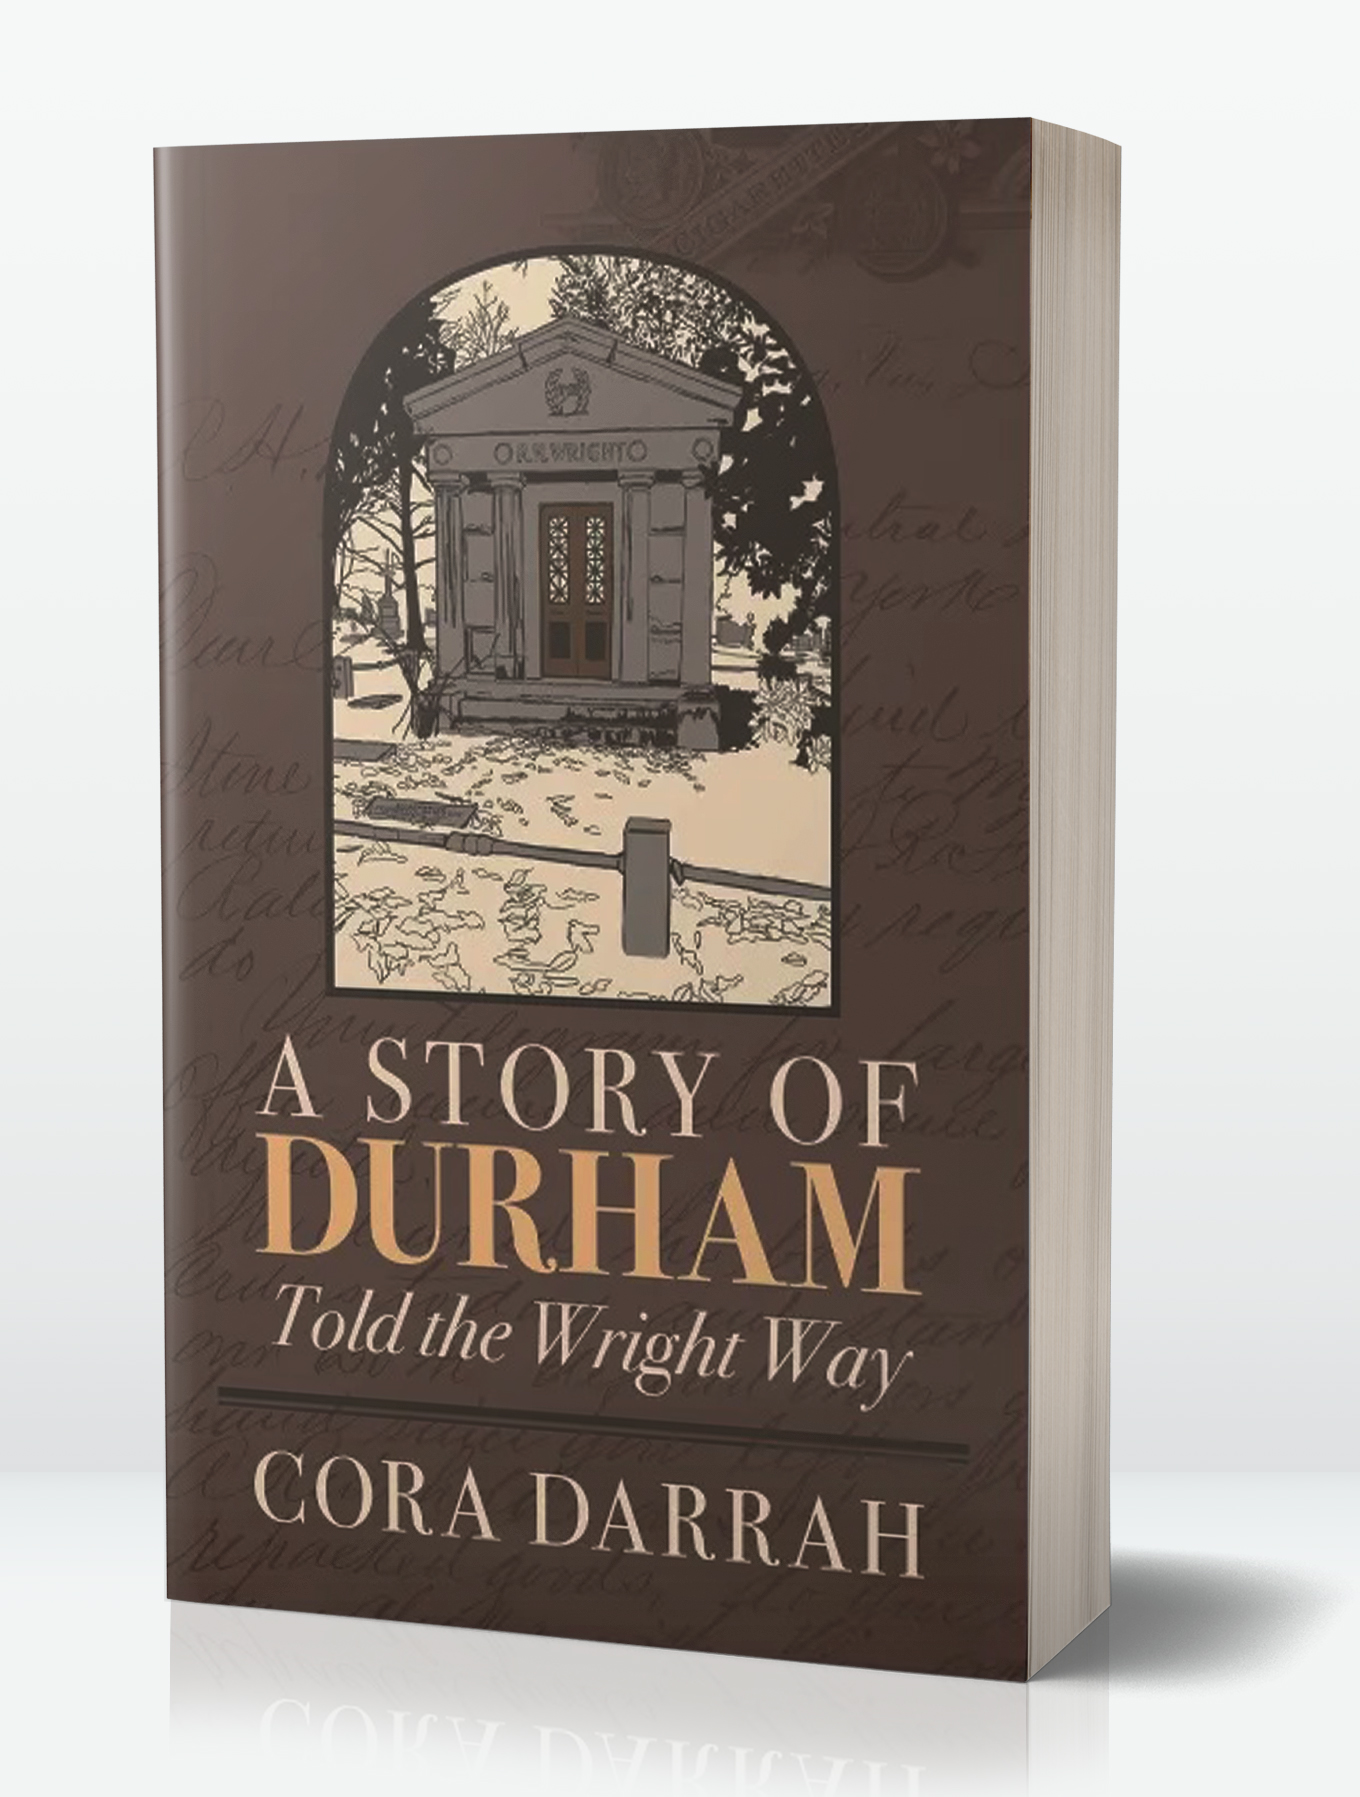 Discover the Rich History of Durham through "A Story of Durham: Told the Wright Way" By Cora Darrah